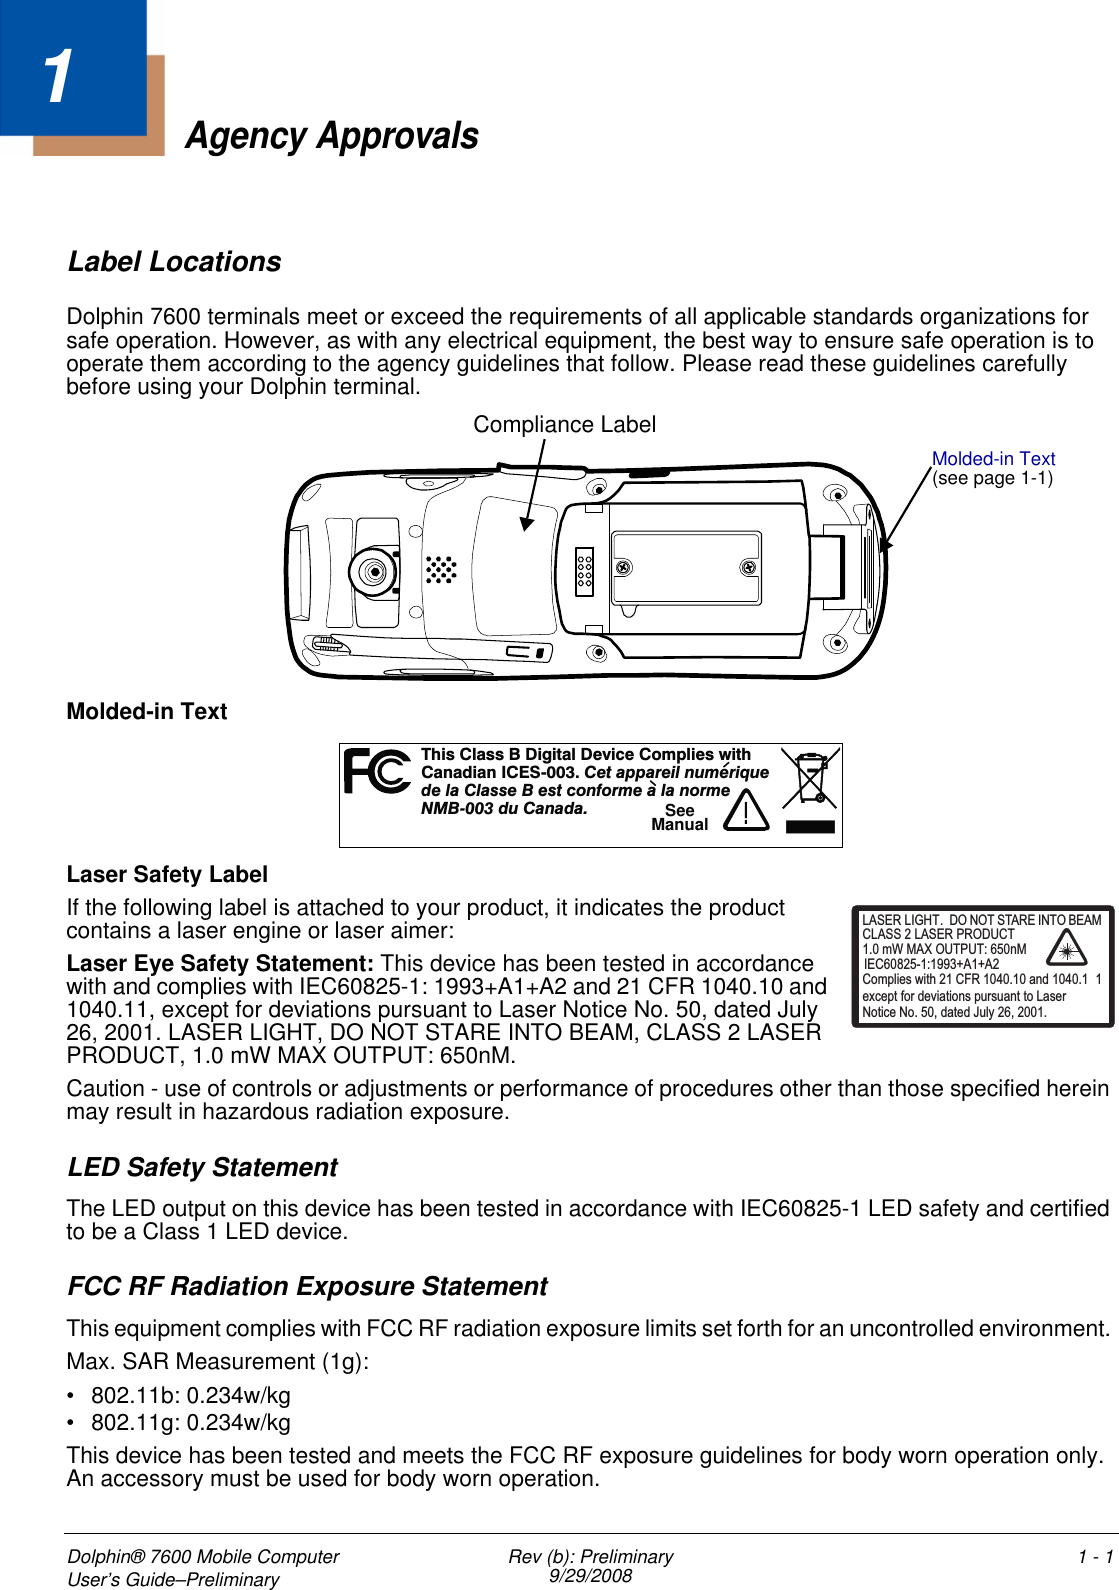 Dolphin® 7600 Mobile Computer User’s Guide–Preliminary Rev (b): Preliminary9/29/2008 1 - 11Agency ApprovalsLabel LocationsDolphin 7600 terminals meet or exceed the requirements of all applicable standards organizations for safe operation. However, as with any electrical equipment, the best way to ensure safe operation is to operate them according to the agency guidelines that follow. Please read these guidelines carefully before using your Dolphin terminal. Molded-in TextLaser Safety LabelIf the following label is attached to your product, it indicates the product contains a laser engine or laser aimer: Laser Eye Safety Statement: This device has been tested in accordance with and complies with IEC60825-1: 1993+A1+A2 and 21 CFR 1040.10 and 1040.11, except for deviations pursuant to Laser Notice No. 50, dated July 26, 2001. LASER LIGHT, DO NOT STARE INTO BEAM, CLASS 2 LASER PRODUCT, 1.0 mW MAX OUTPUT: 650nM. Caution - use of controls or adjustments or performance of procedures other than those specified herein may result in hazardous radiation exposure.LED Safety StatementThe LED output on this device has been tested in accordance with IEC60825-1 LED safety and certified to be a Class 1 LED device.FCC RF Radiation Exposure StatementThis equipment complies with FCC RF radiation exposure limits set forth for an uncontrolled environment. Max. SAR Measurement (1g):• 802.11b: 0.234w/kg • 802.11g: 0.234w/kgThis device has been tested and meets the FCC RF exposure guidelines for body worn operation only. An accessory must be used for body worn operation. Compliance LabelMolded-in Text (see page 1-1)hs a s i t D c Cm i tT i Cl s B D gi al evi e o pl es wi hCndiI -00 eaai muaa anCES3.Ct pprel nu eriq ed l C s e B es con e a a ormea lastform l n e00 u n aNMB- 3 dCaad .!SeeManualLASER LIGHT. DO NOT STARE INTO BEAM1.0 mW MAX OUTPUT: 650nMIEC60825-1:1993+A1+A2CLASS 2 LASER PRODUCTComplies with 21 CFR 1040.10 and 1040.1 1except for deviations pursuant to Laser Notice No. 50, dated July 26, 2001.